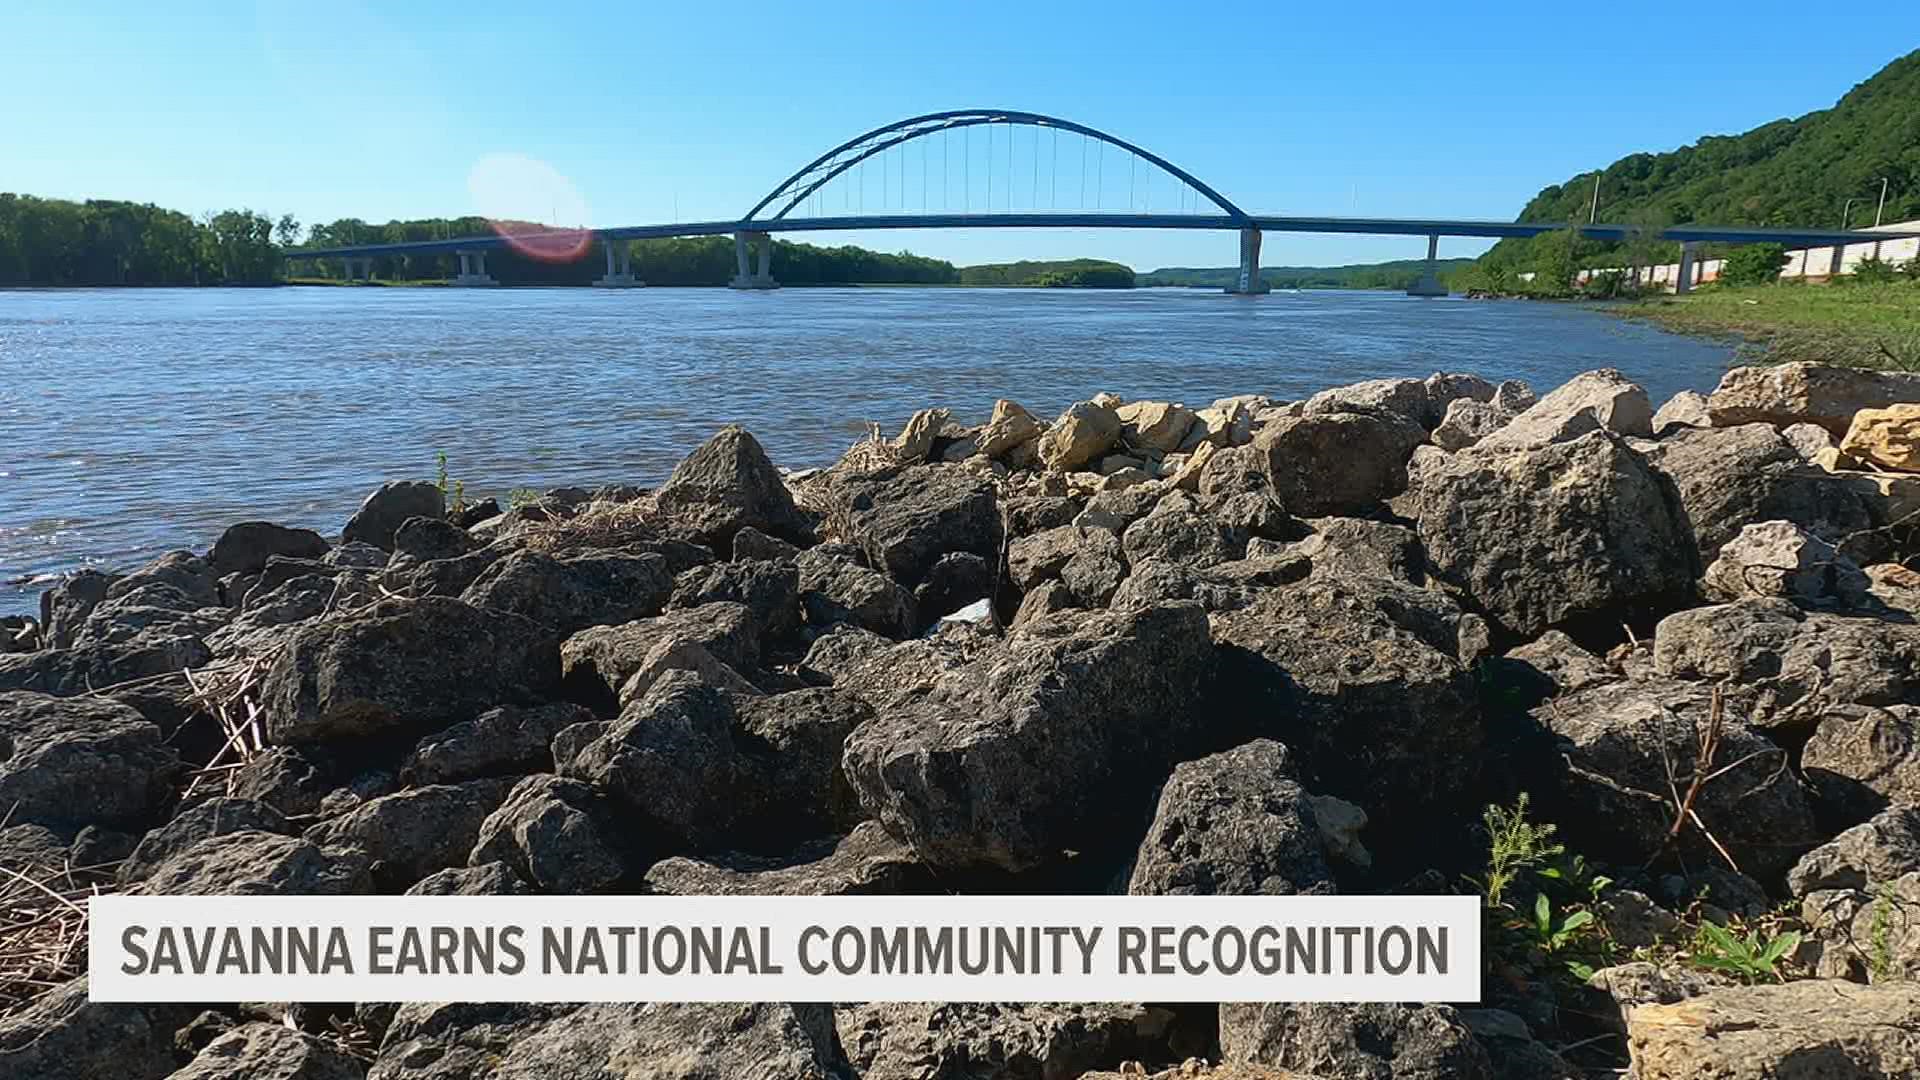 This is the second year in a row that USA Today named Savanna the No. 1 town in the category.